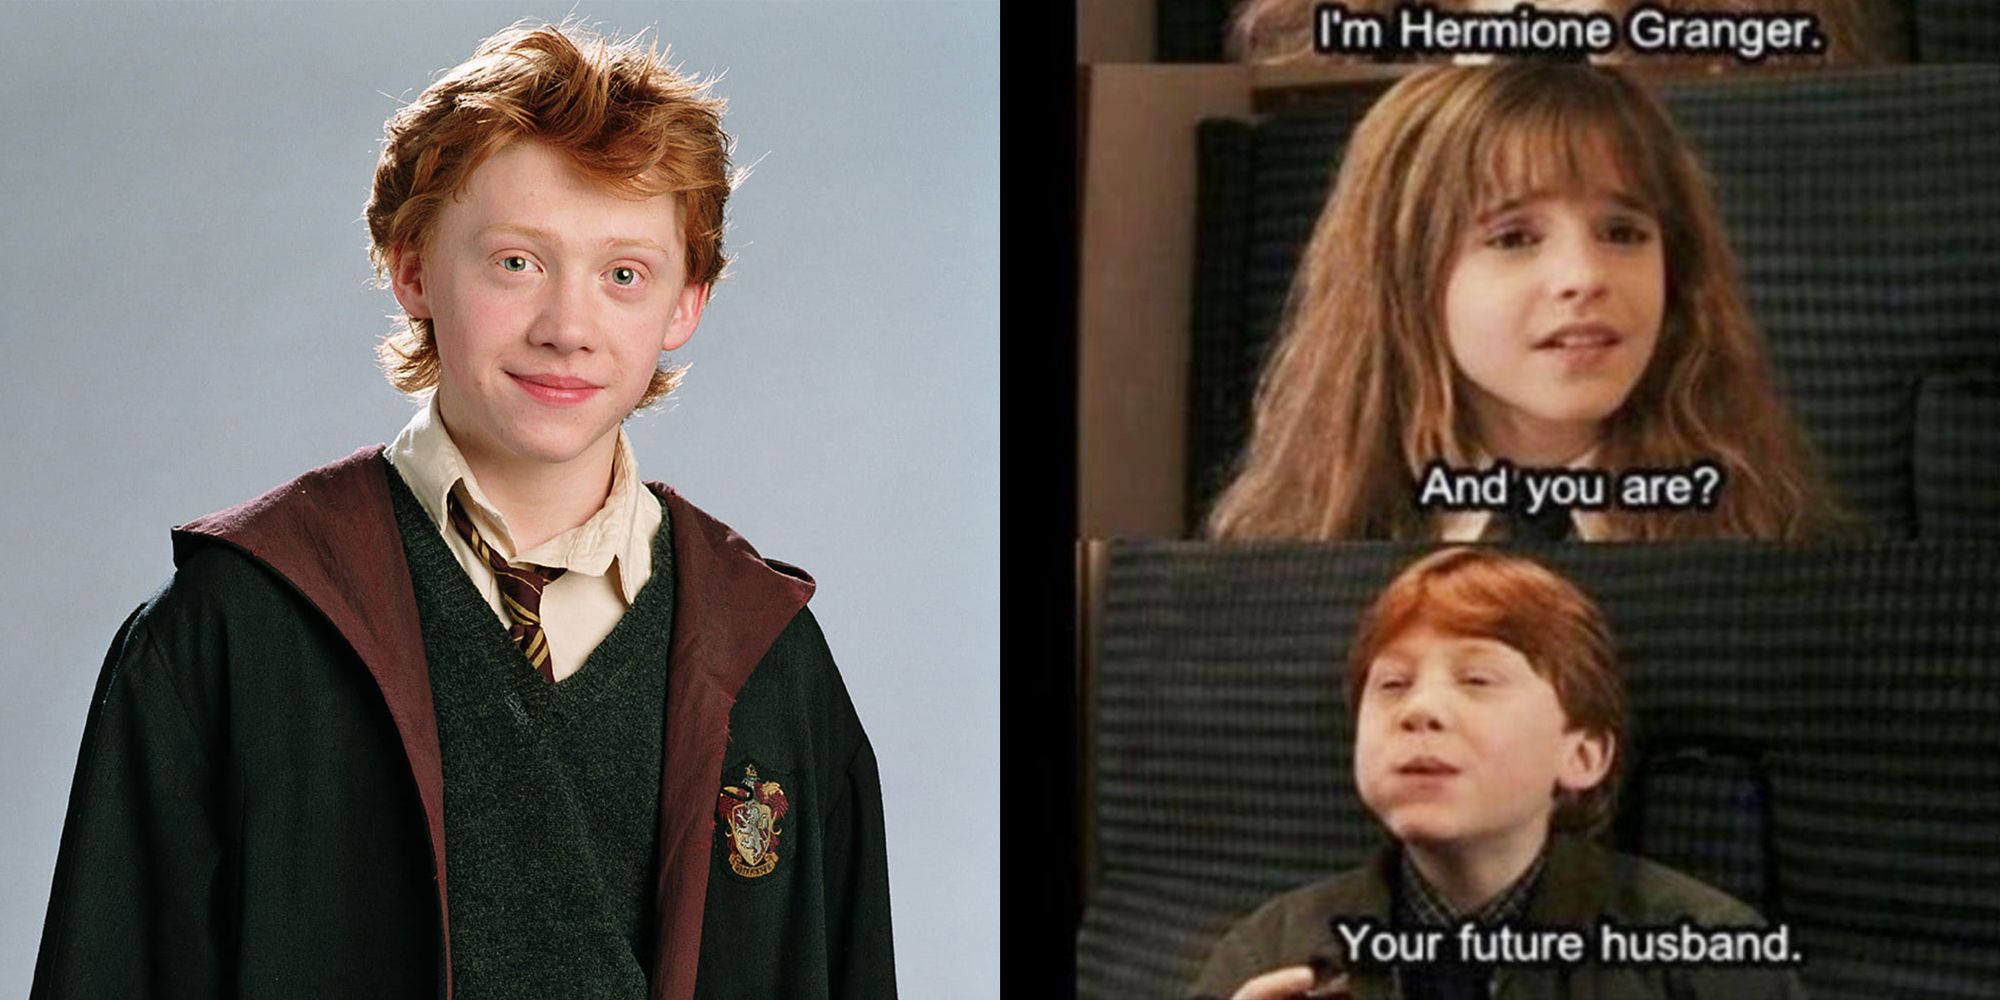 Best Ron and Hermione Harry Potter Memes